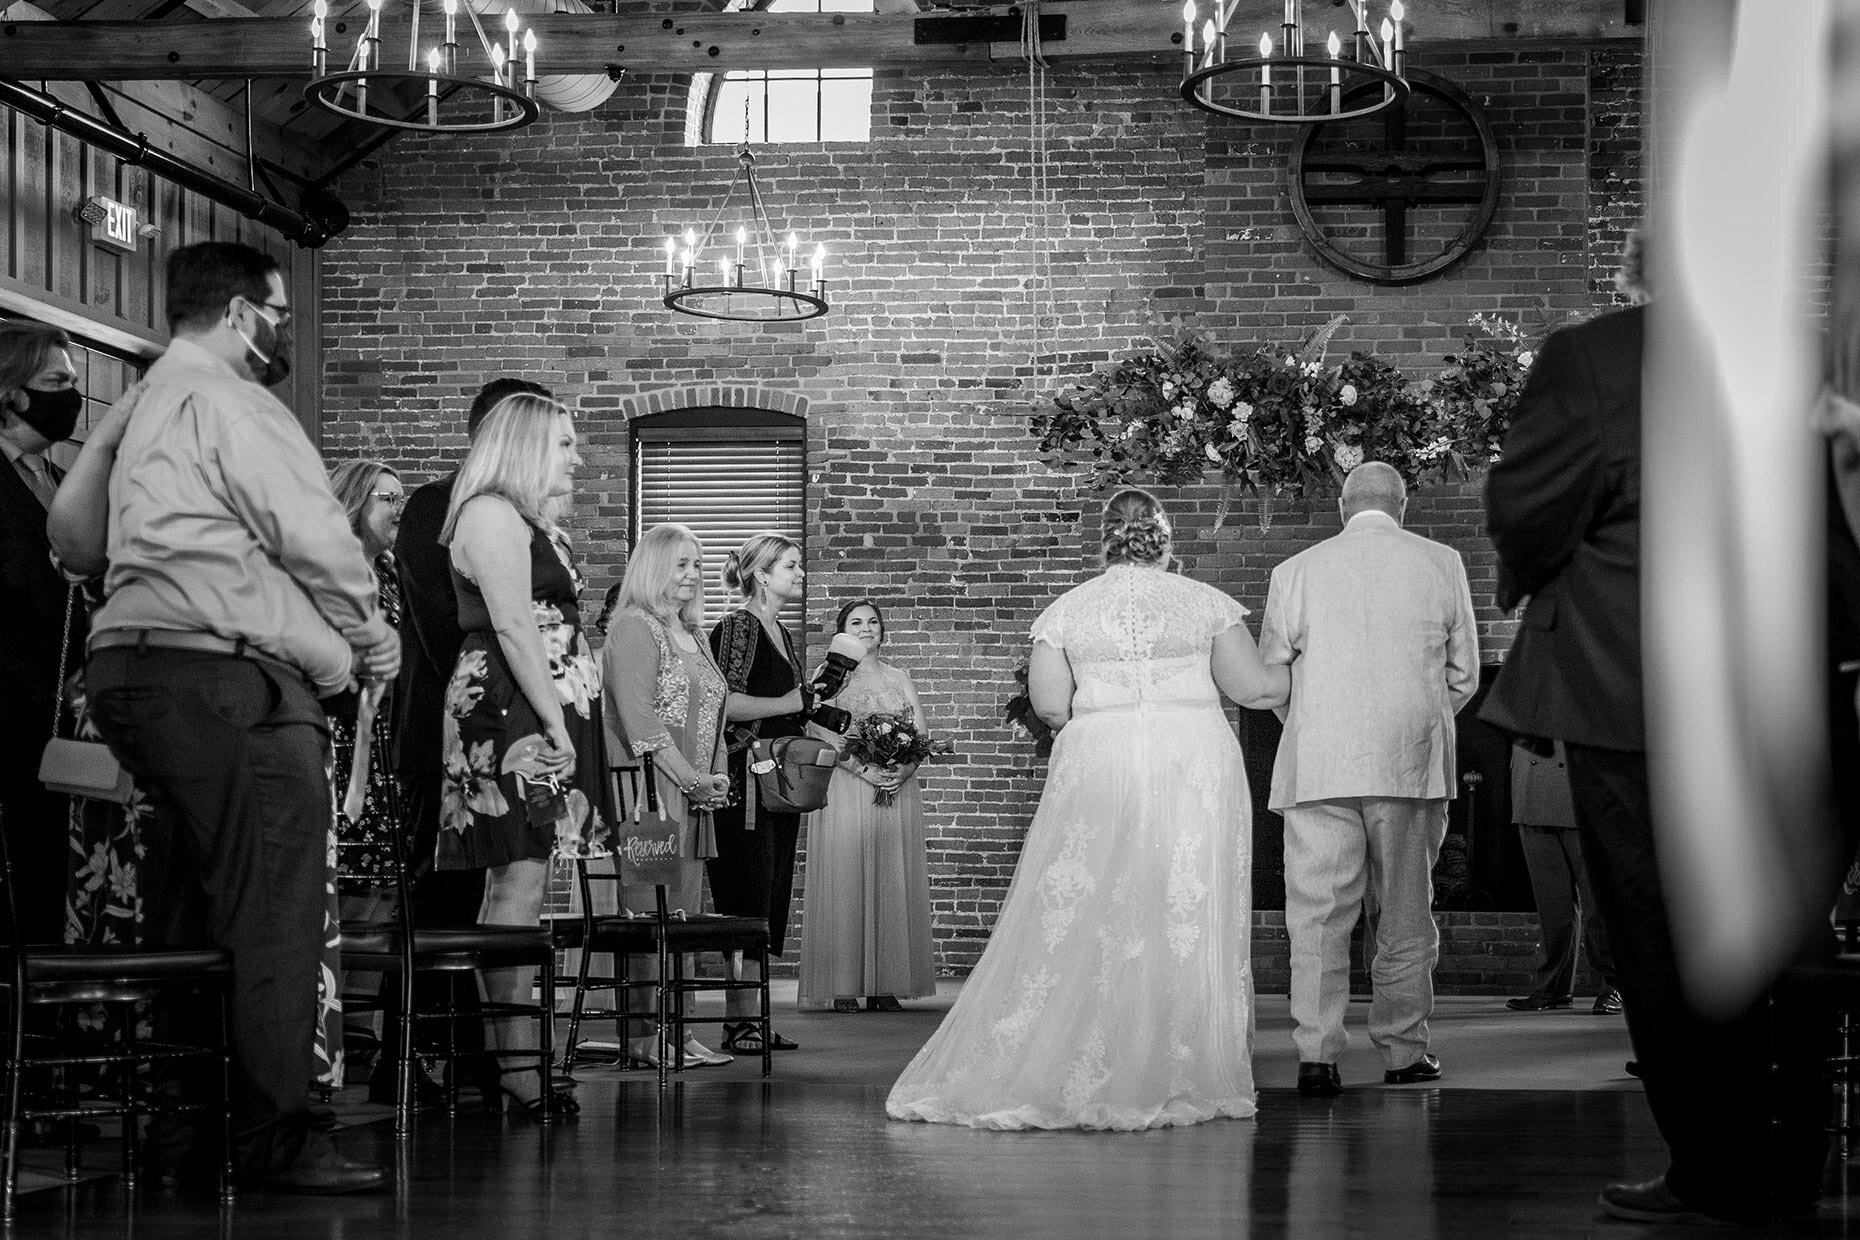 Wedding Ceremony processional in black and white of back of dress and train